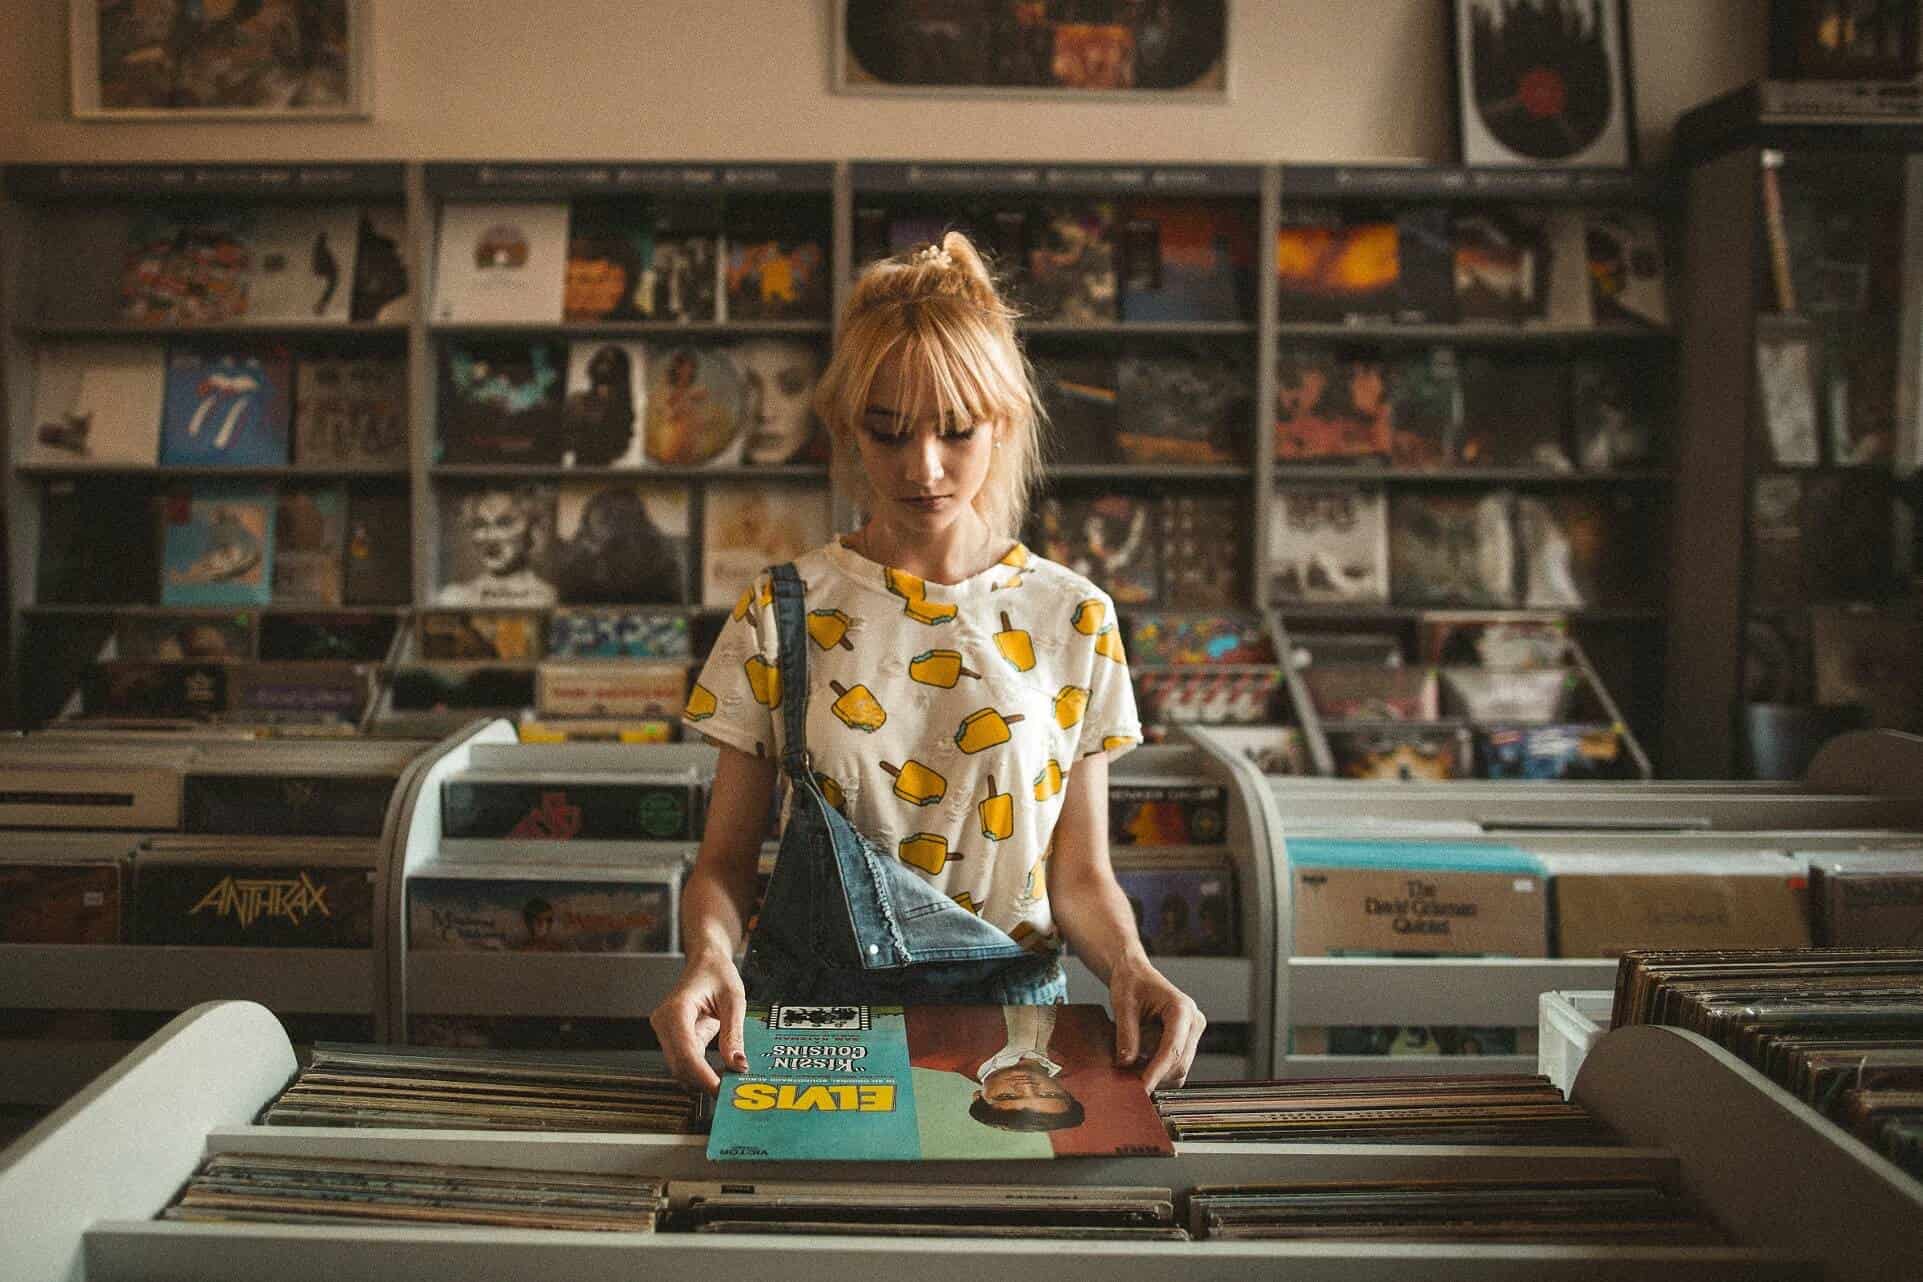 Top 5 Benefits Of Having Your Own Vinyl Record Collection